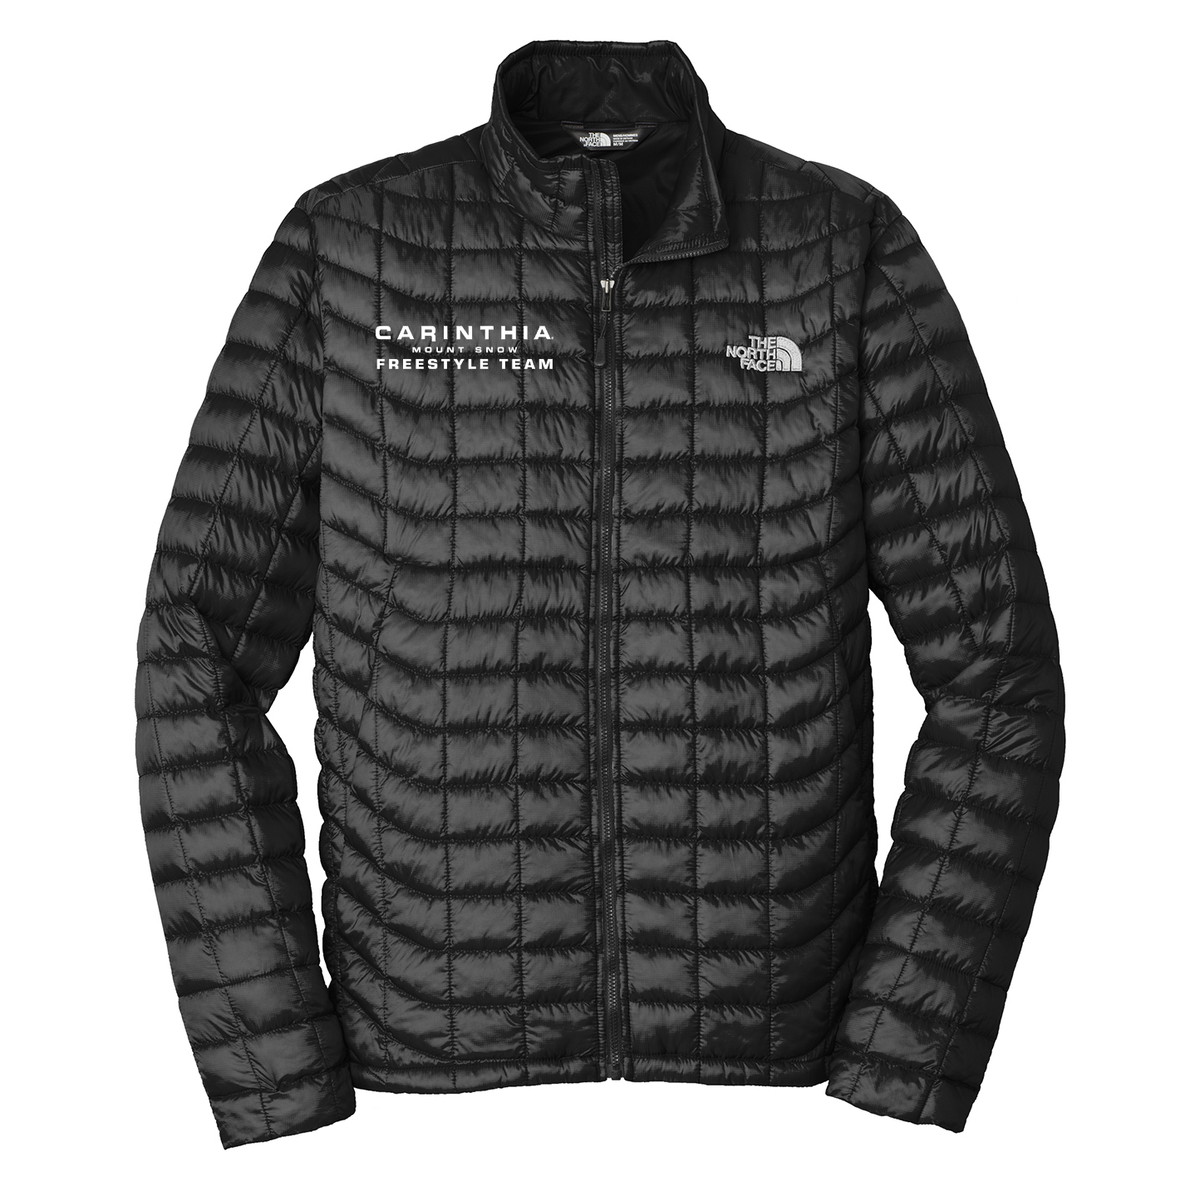 Mount Snow The North Face ThermoBall Jacket